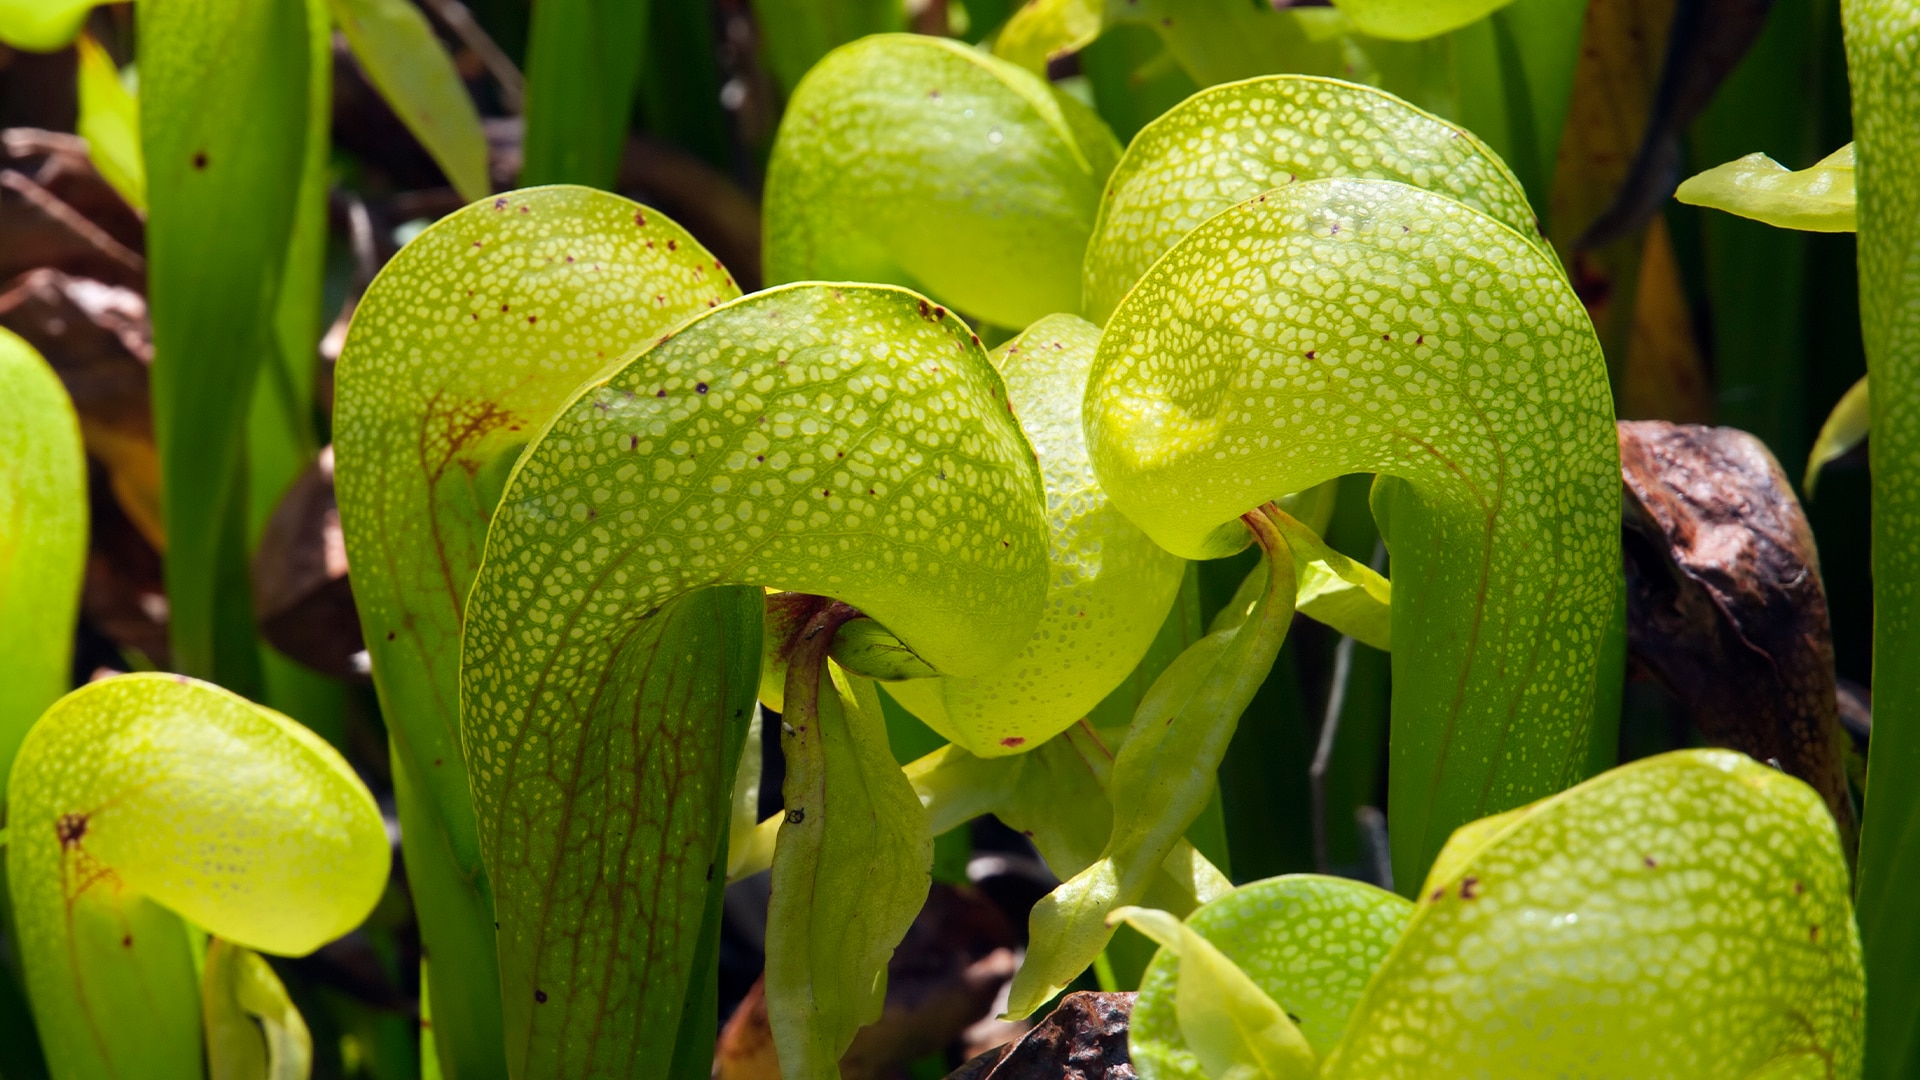 Multiple green cobra lilies with large curved petals